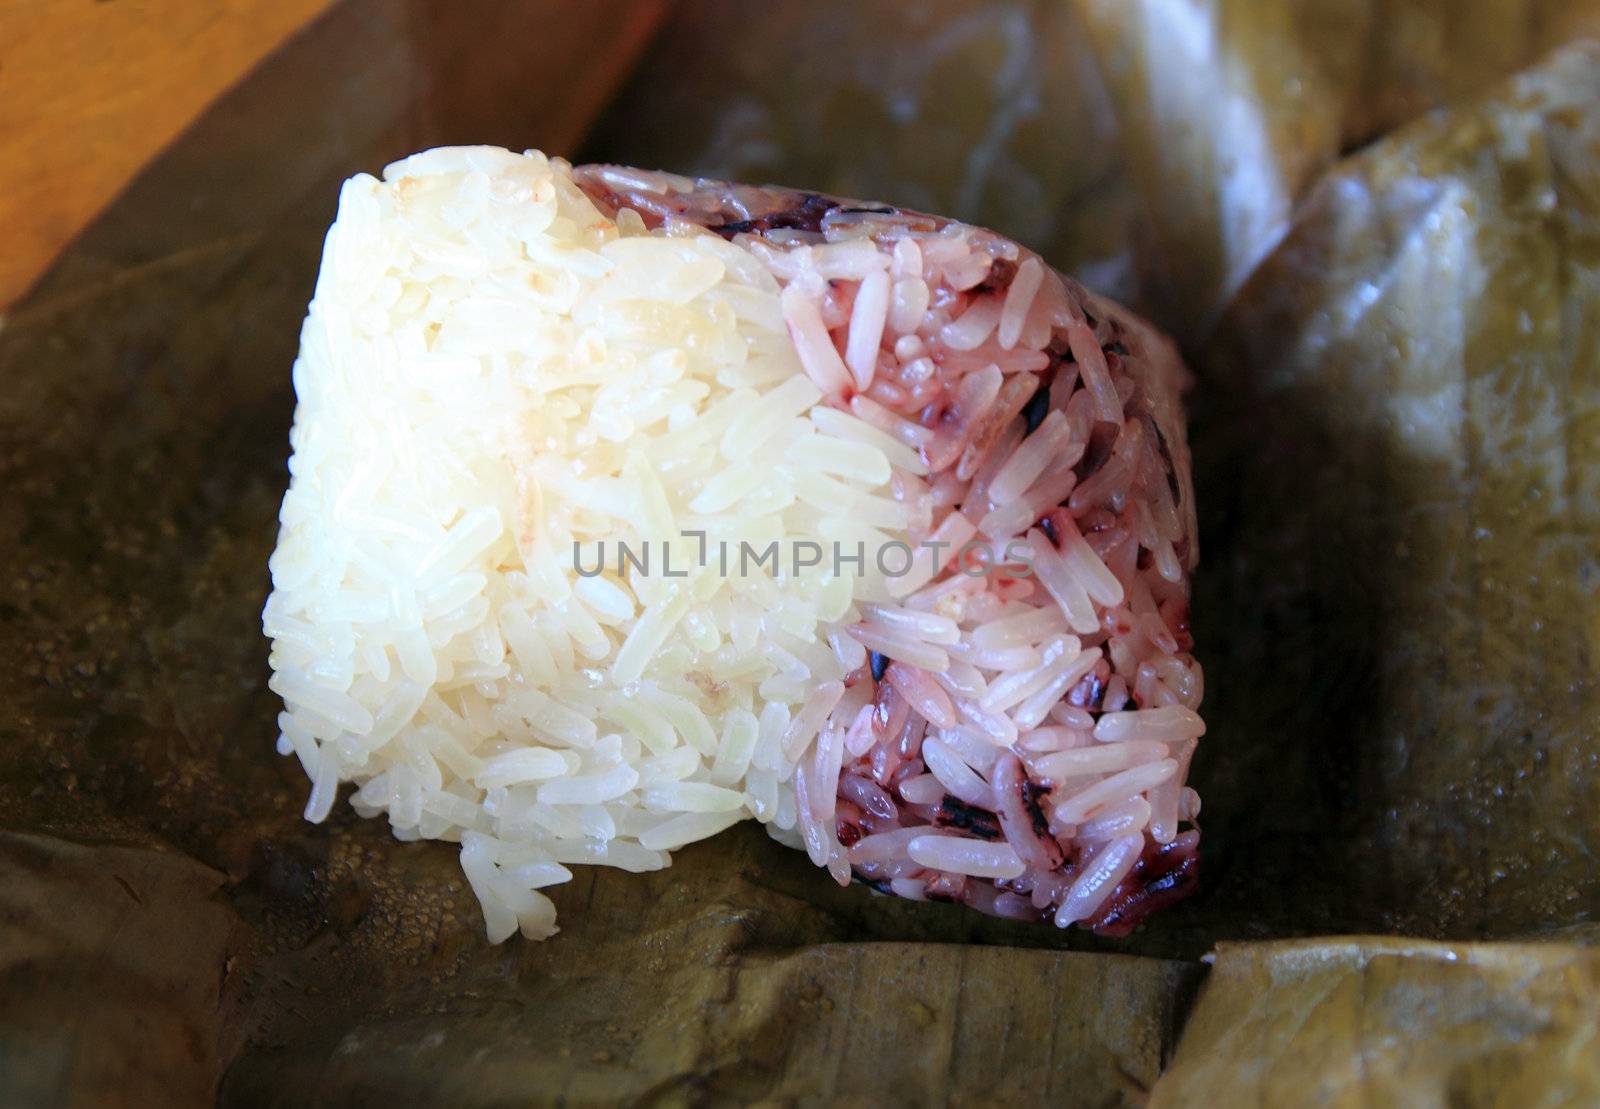 glutinous rice wrapped in banana leaves